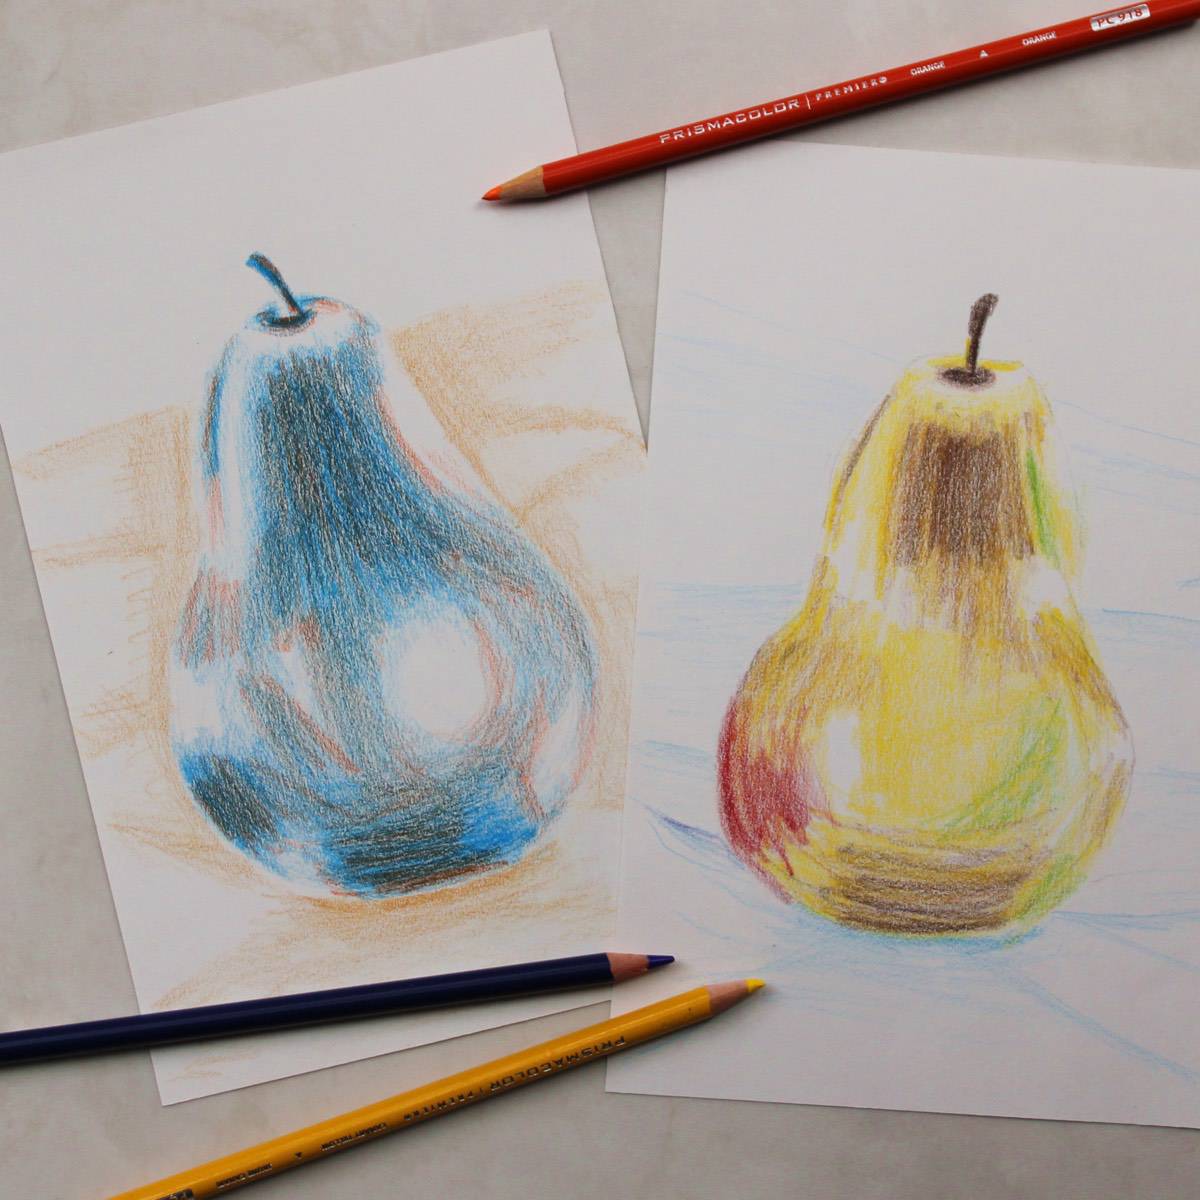 Colored pencil sketches of pears next to colored pencils.